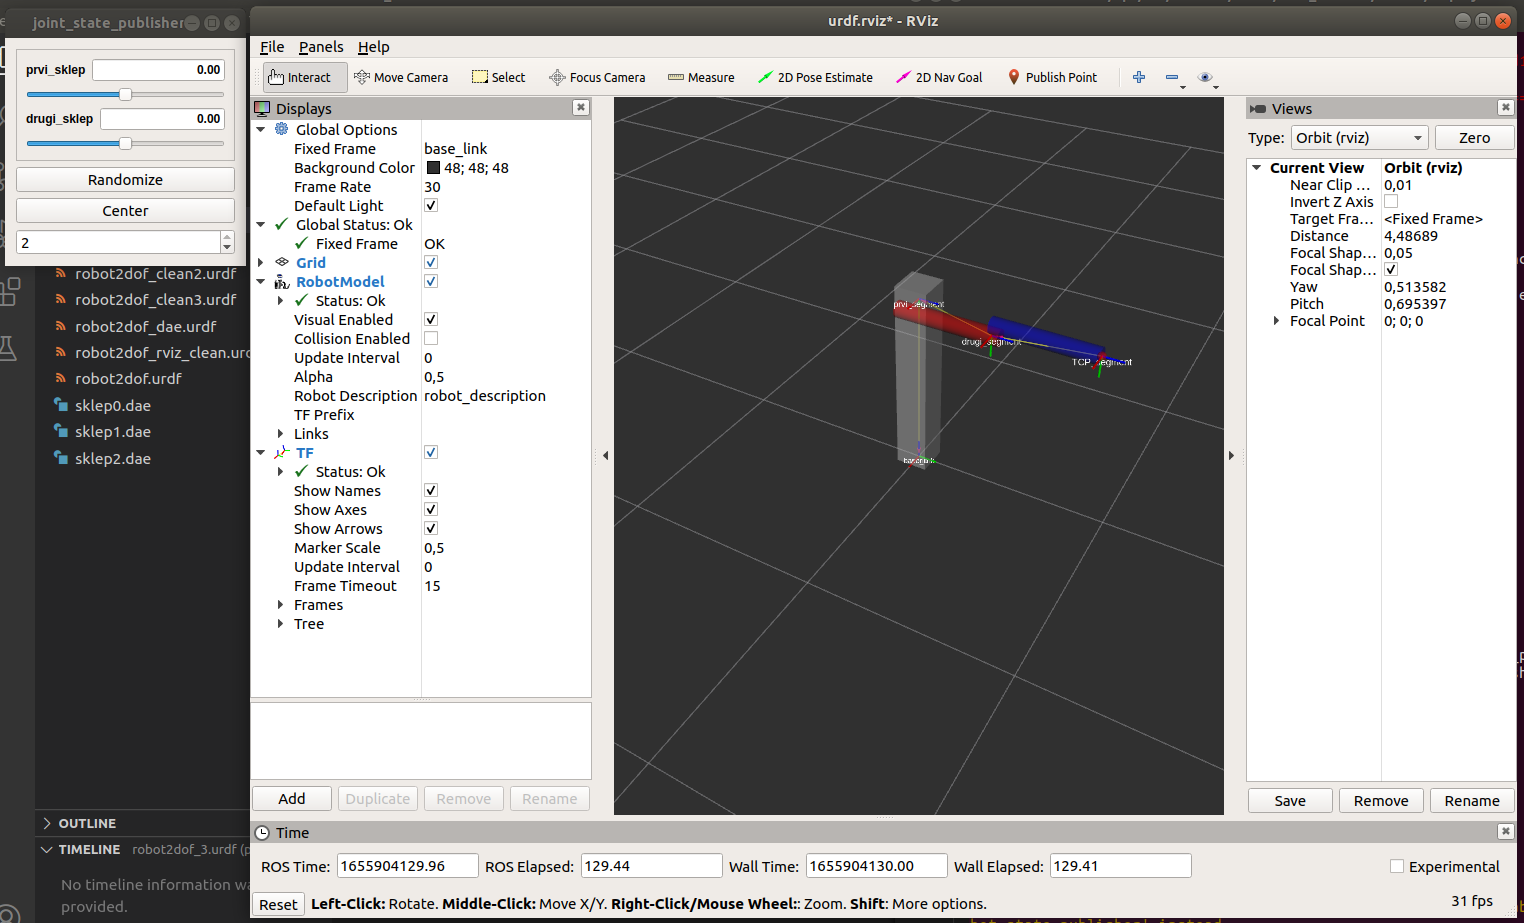 Image shows rviz and gui for 2 DOF robot